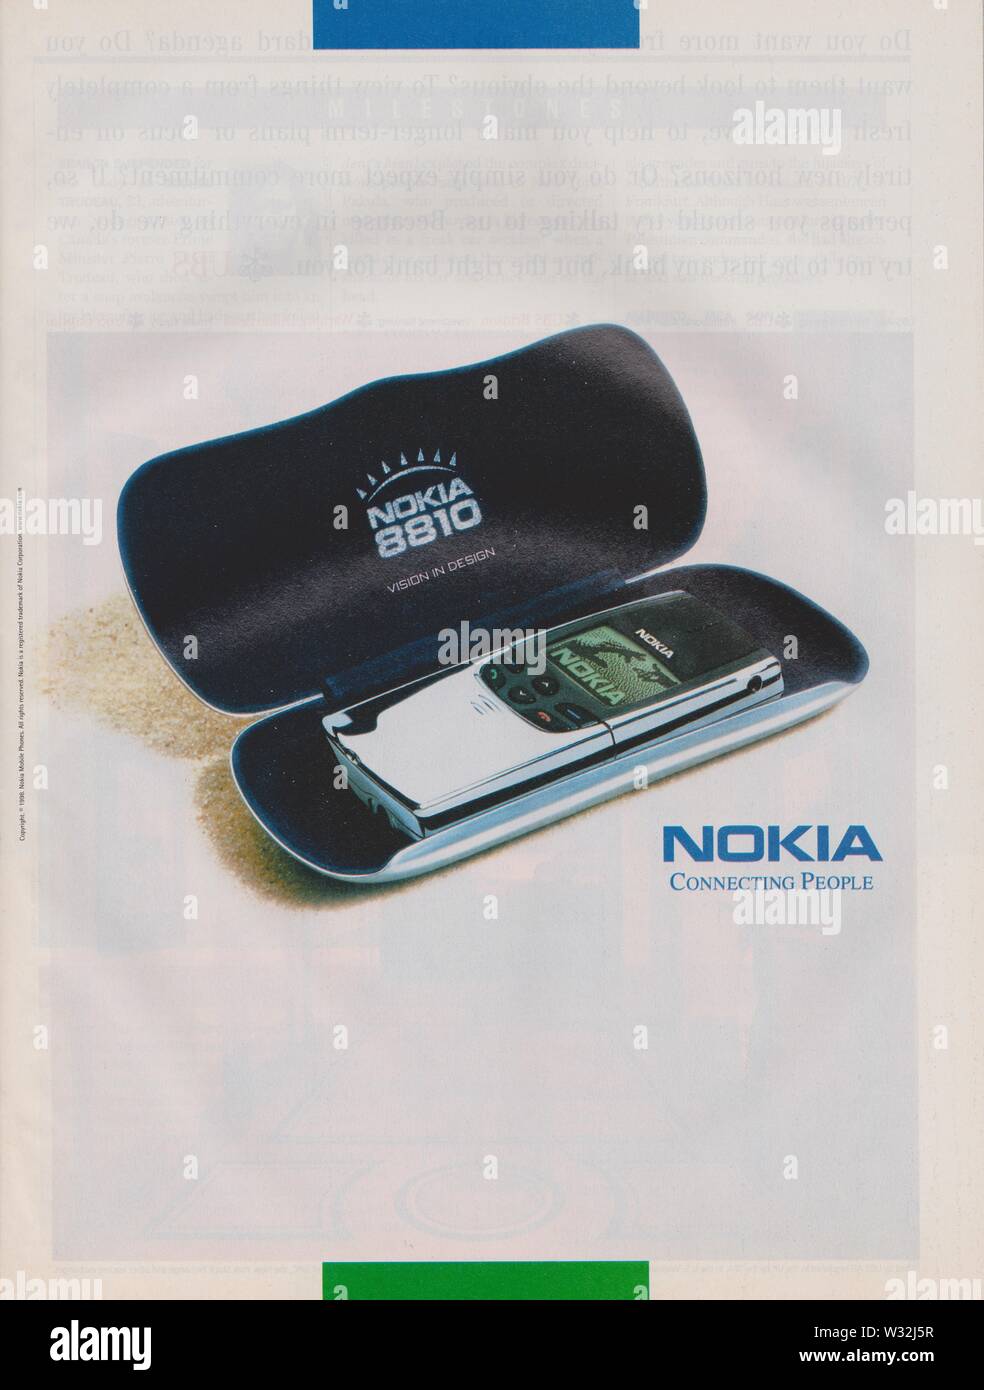 poster advertising Nokia 8810 phone in paper magazine from 1998 year, NOKIA Connecting People slogan, advertisement, creative advert Stock Photo